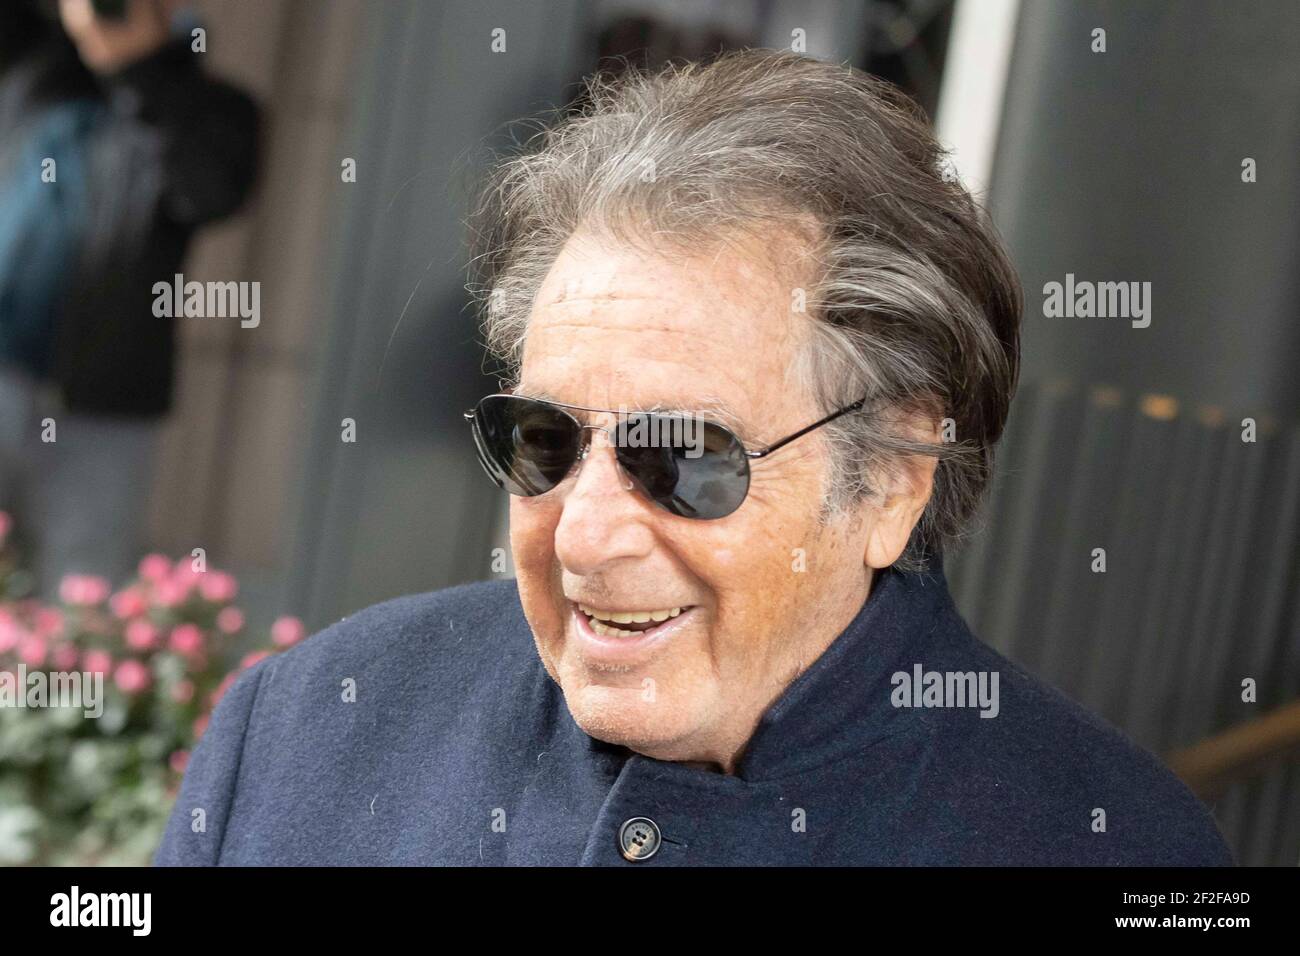 American actor Al Pacino spotted at his hotel during the shooting in the  city of the film House of Gucci directed by Ridley Scott. Milan (Italy),  March 11th, 2021 (Photo by Marco